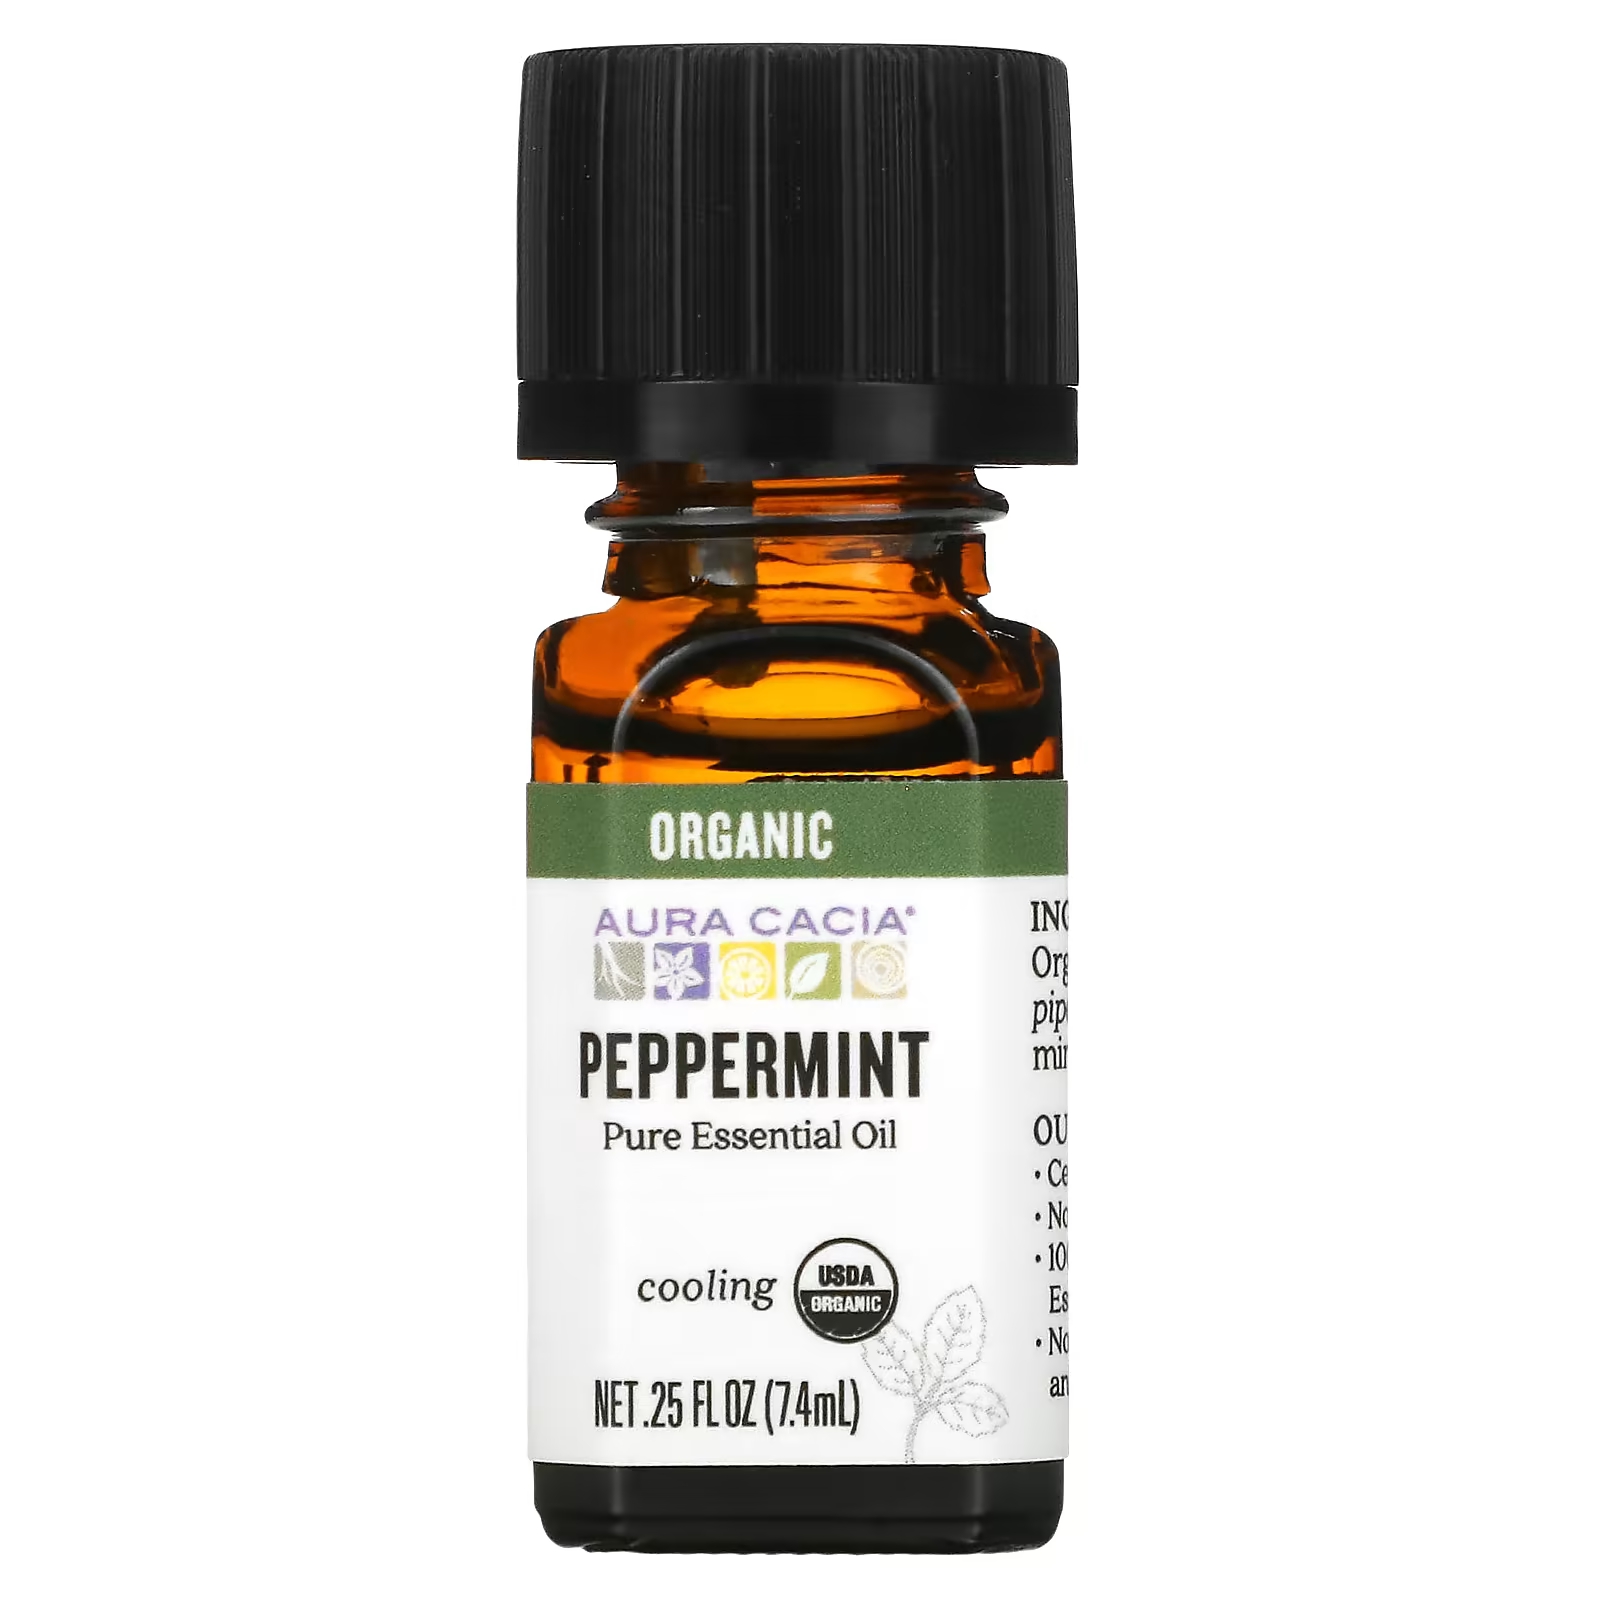 Масло Aura Cacia Pure Essential Oil Organic Peppermint, 7,4 мл peppermint essential oil 100% pure therapeutic grade peppermint oil 10ml